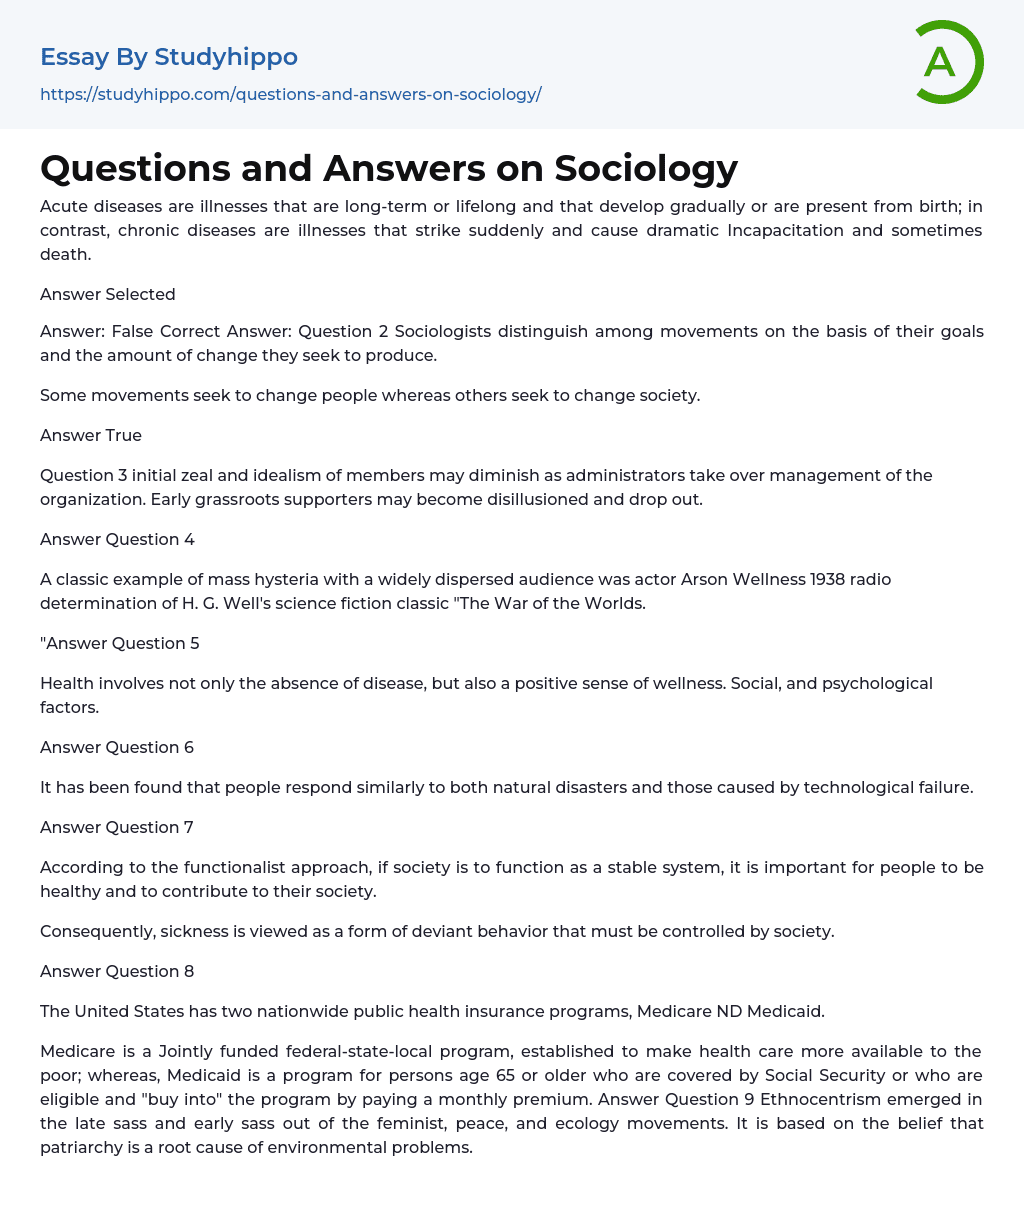 Questions and Answers on Sociology Essay Example